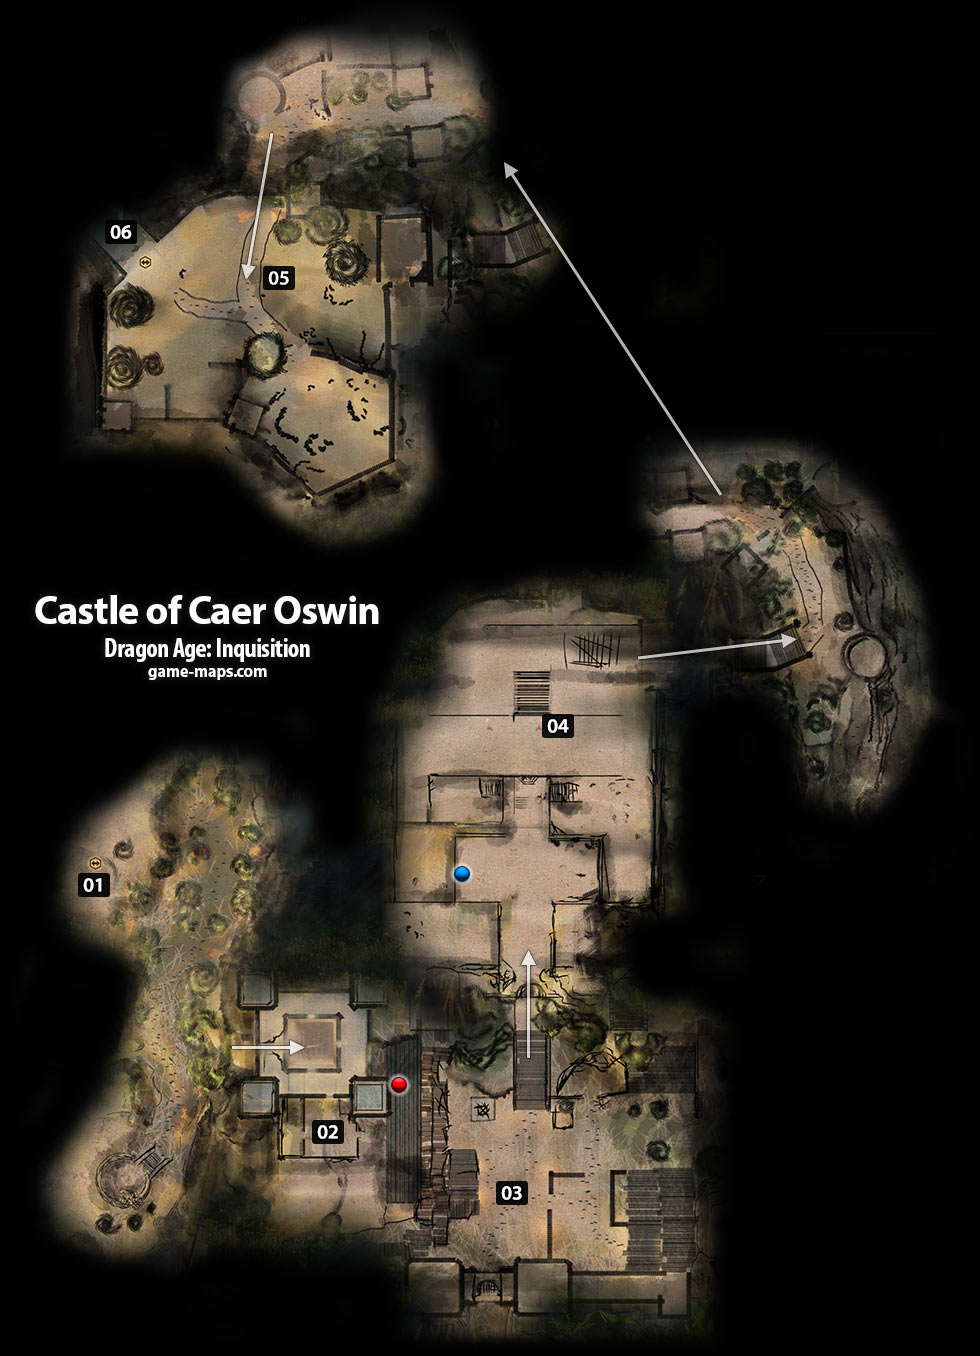 Castle of Caer Oswin Map Dragon Age: Inquisition